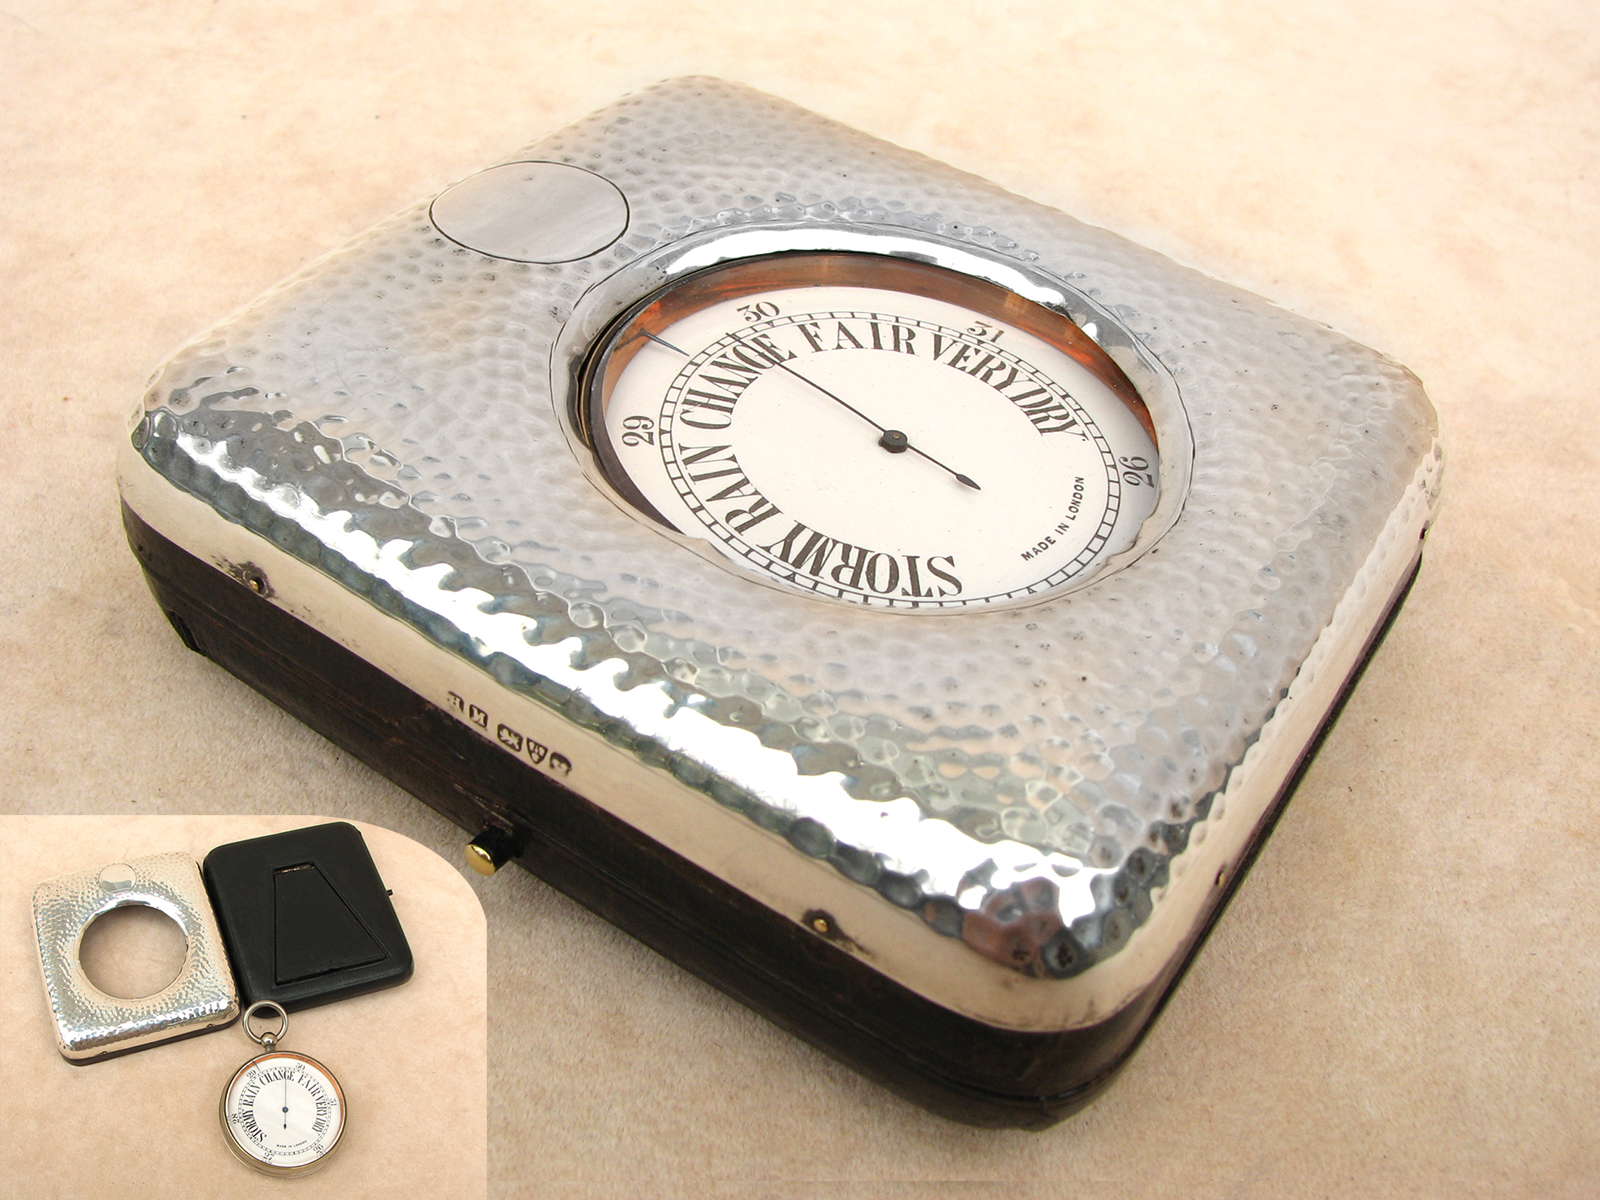 Early 1900s Goliath pocket barometer with Chester hallmarked silver display case